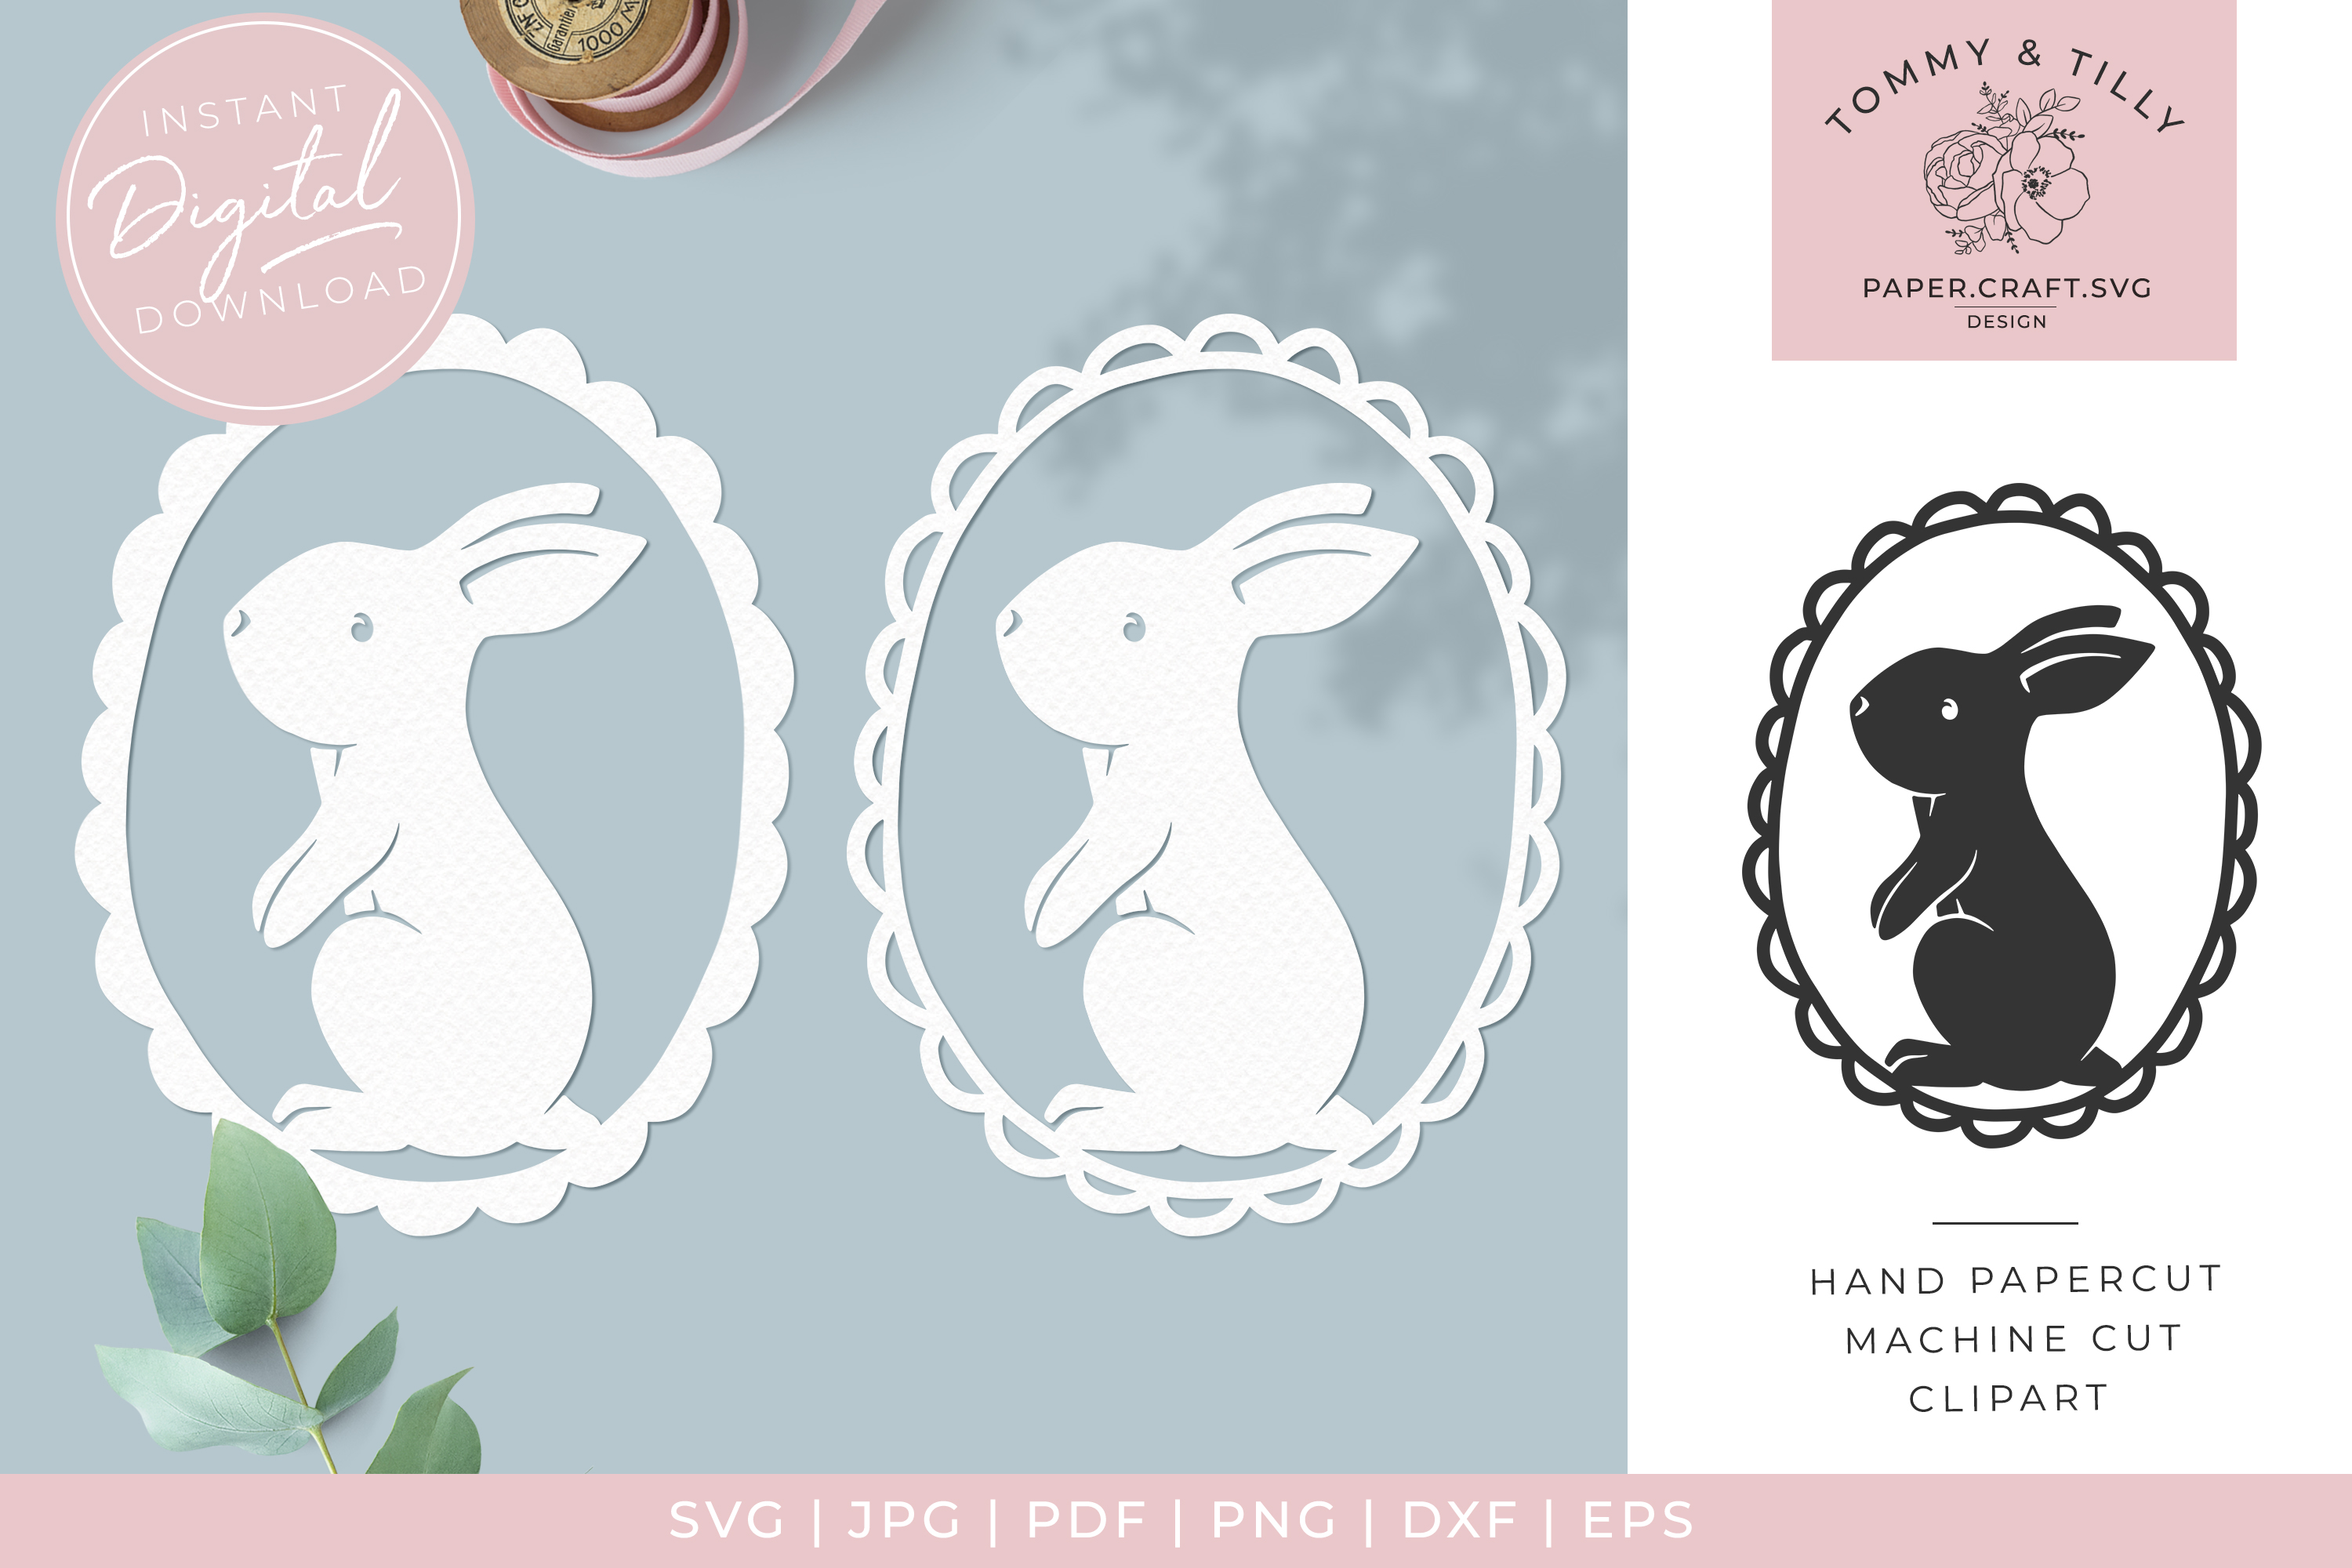 Download Rabbit Wreath x 2 - Butterfly SVG Papercut Cutting File